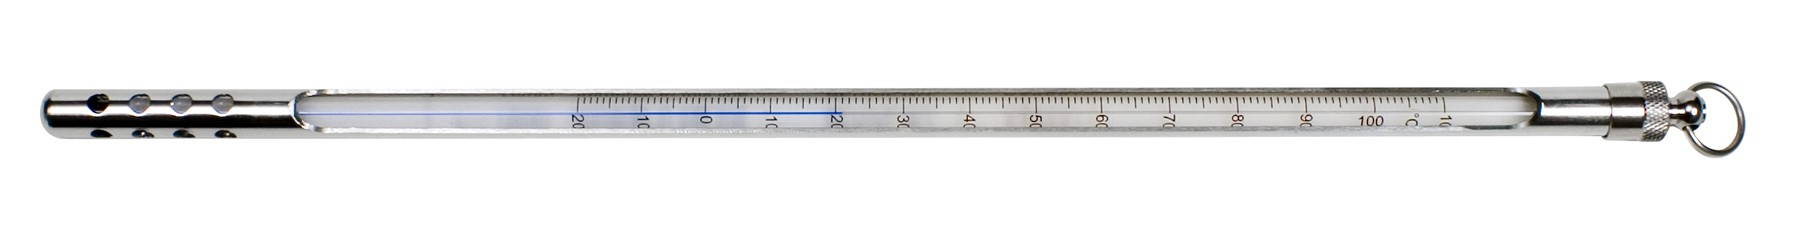 H-B DURAC Plus Armored Liquid-In-Glass Thermometer; 20 to 500F, 76mm Immersion, Organic Liquid Fill